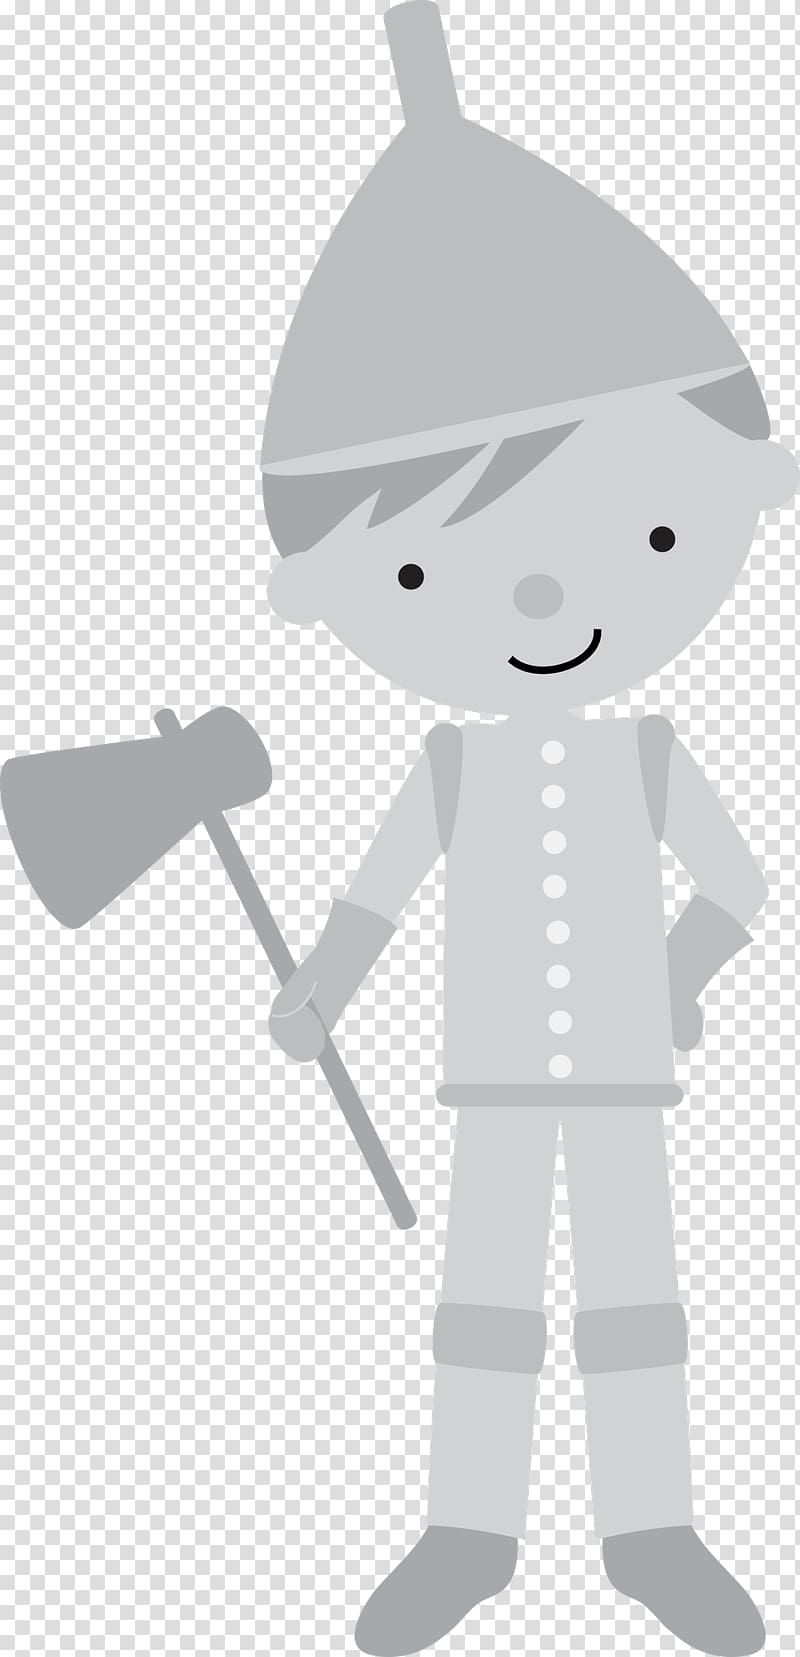 The Tin Man The Wonderful Wizard of Oz The Wizard of Oz Scarecrow , mago de oz transparent background PNG clipart